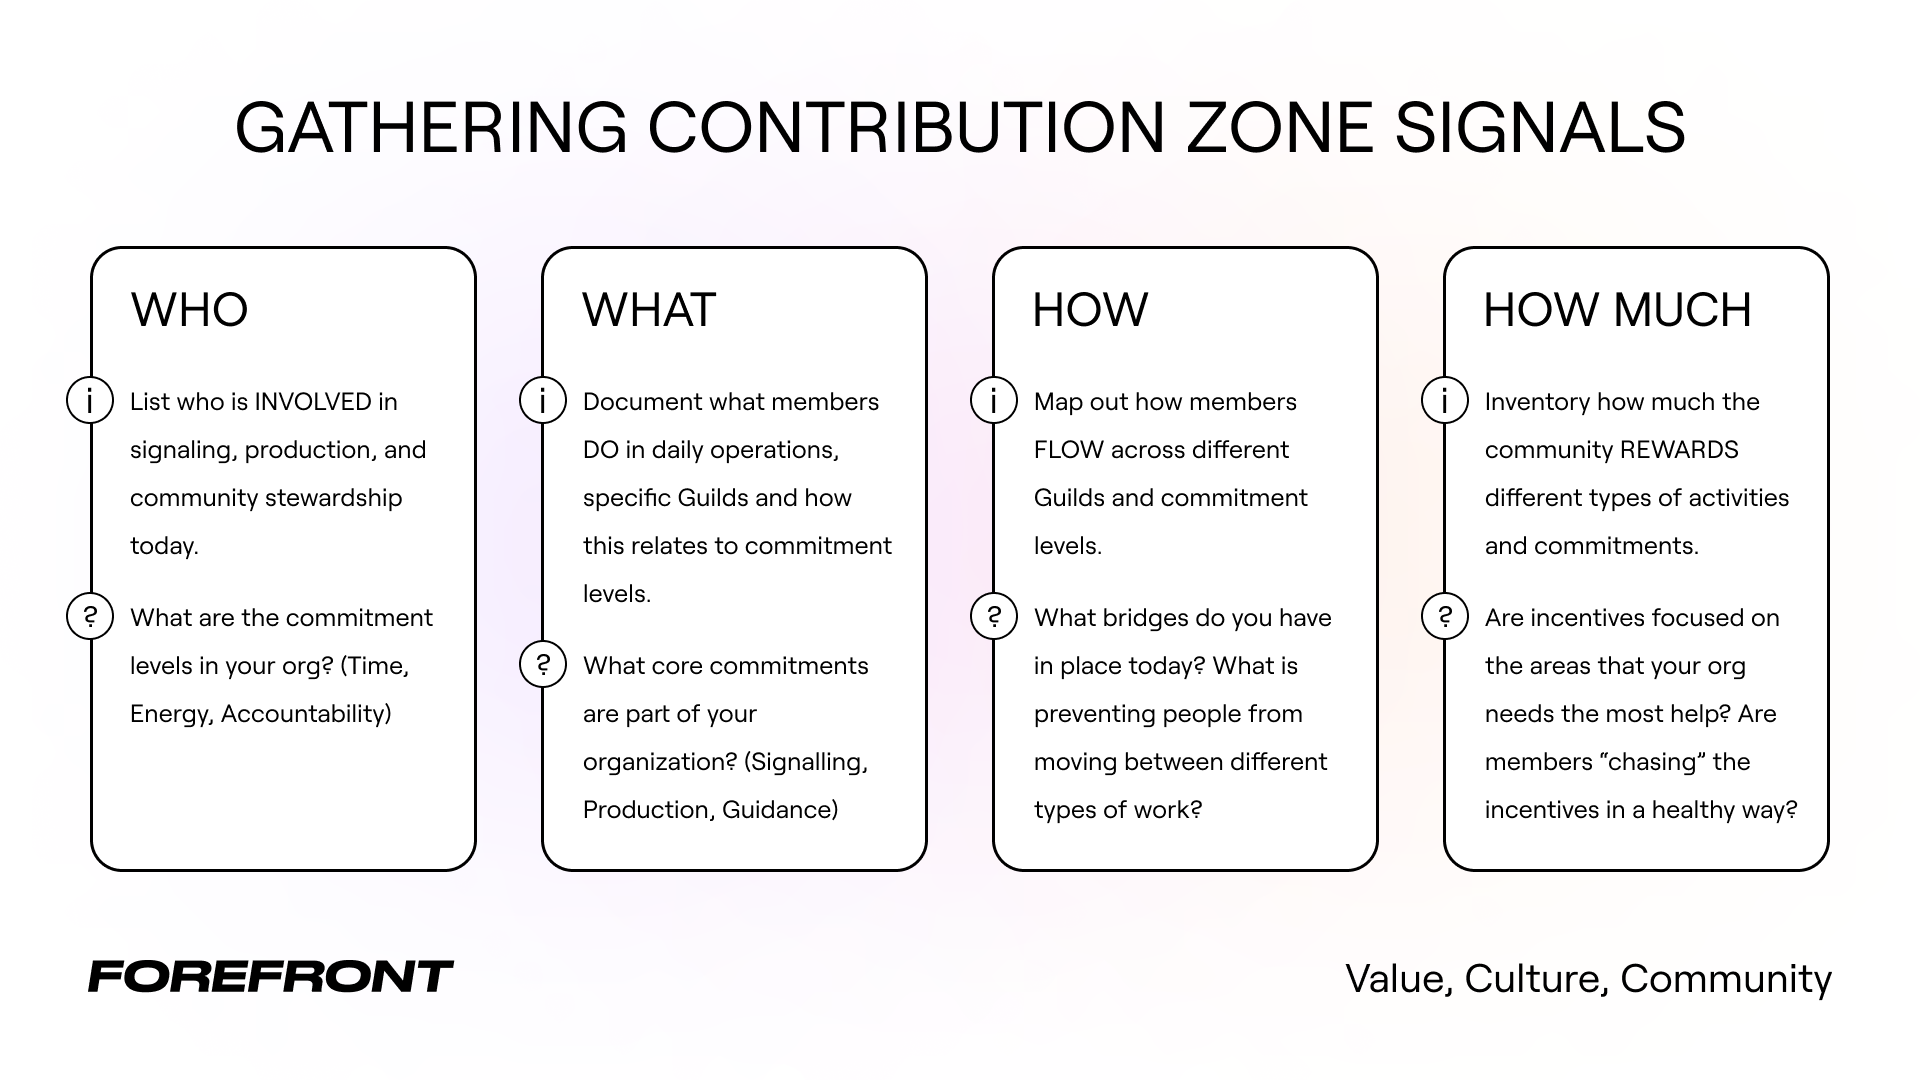 How To: Gathering Contribution Zone Signals